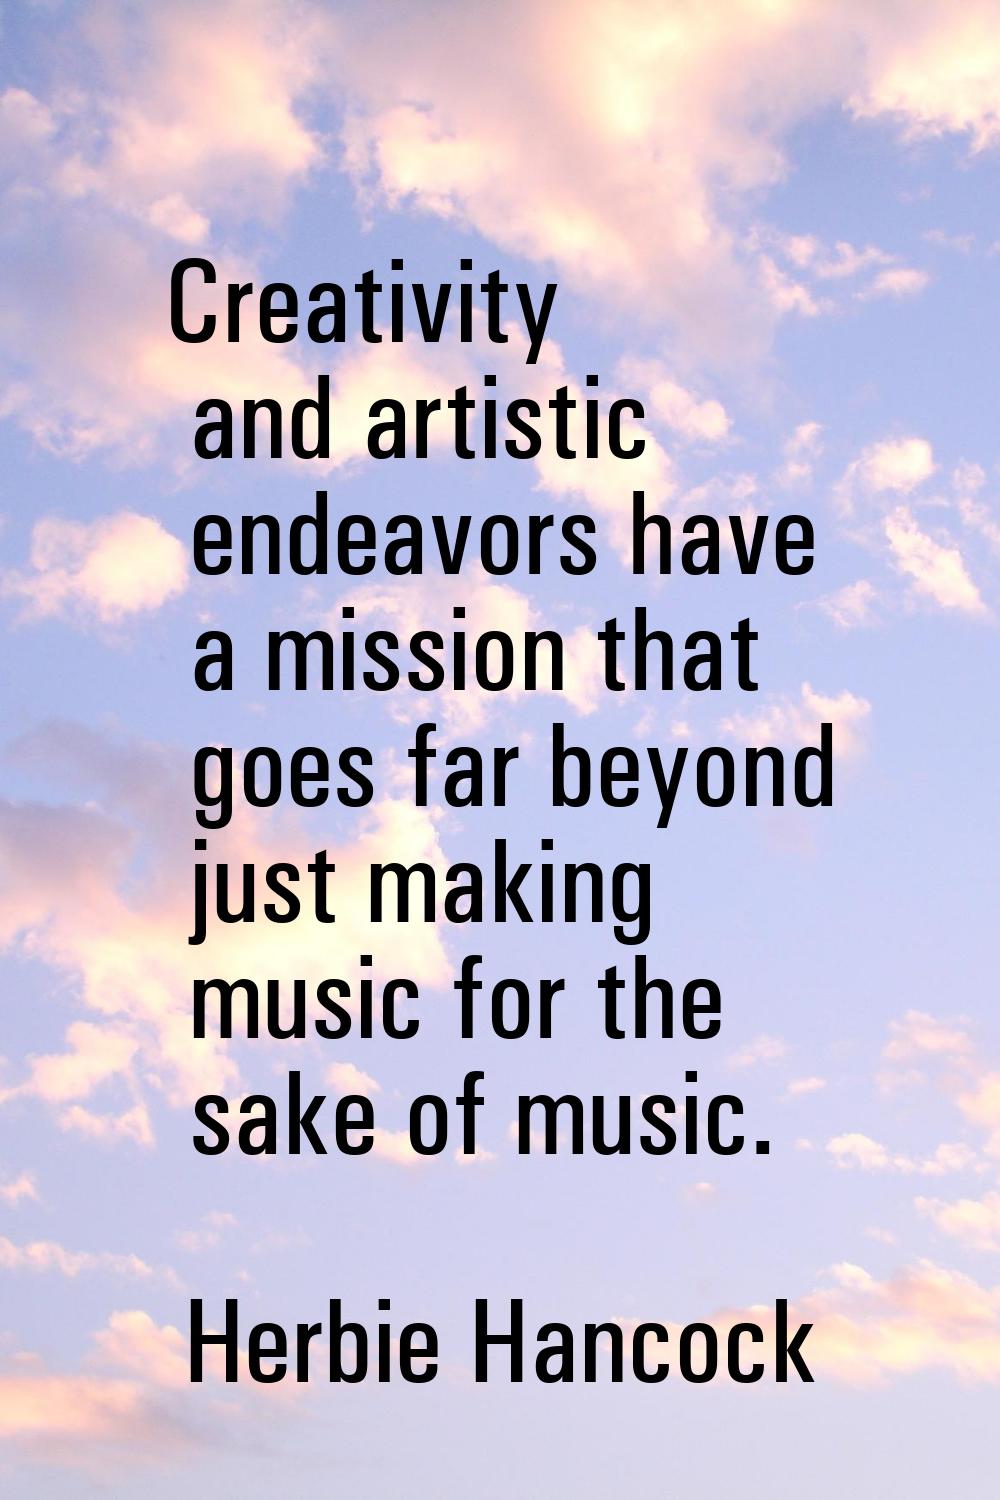 Creativity and artistic endeavors have a mission that goes far beyond just making music for the sak